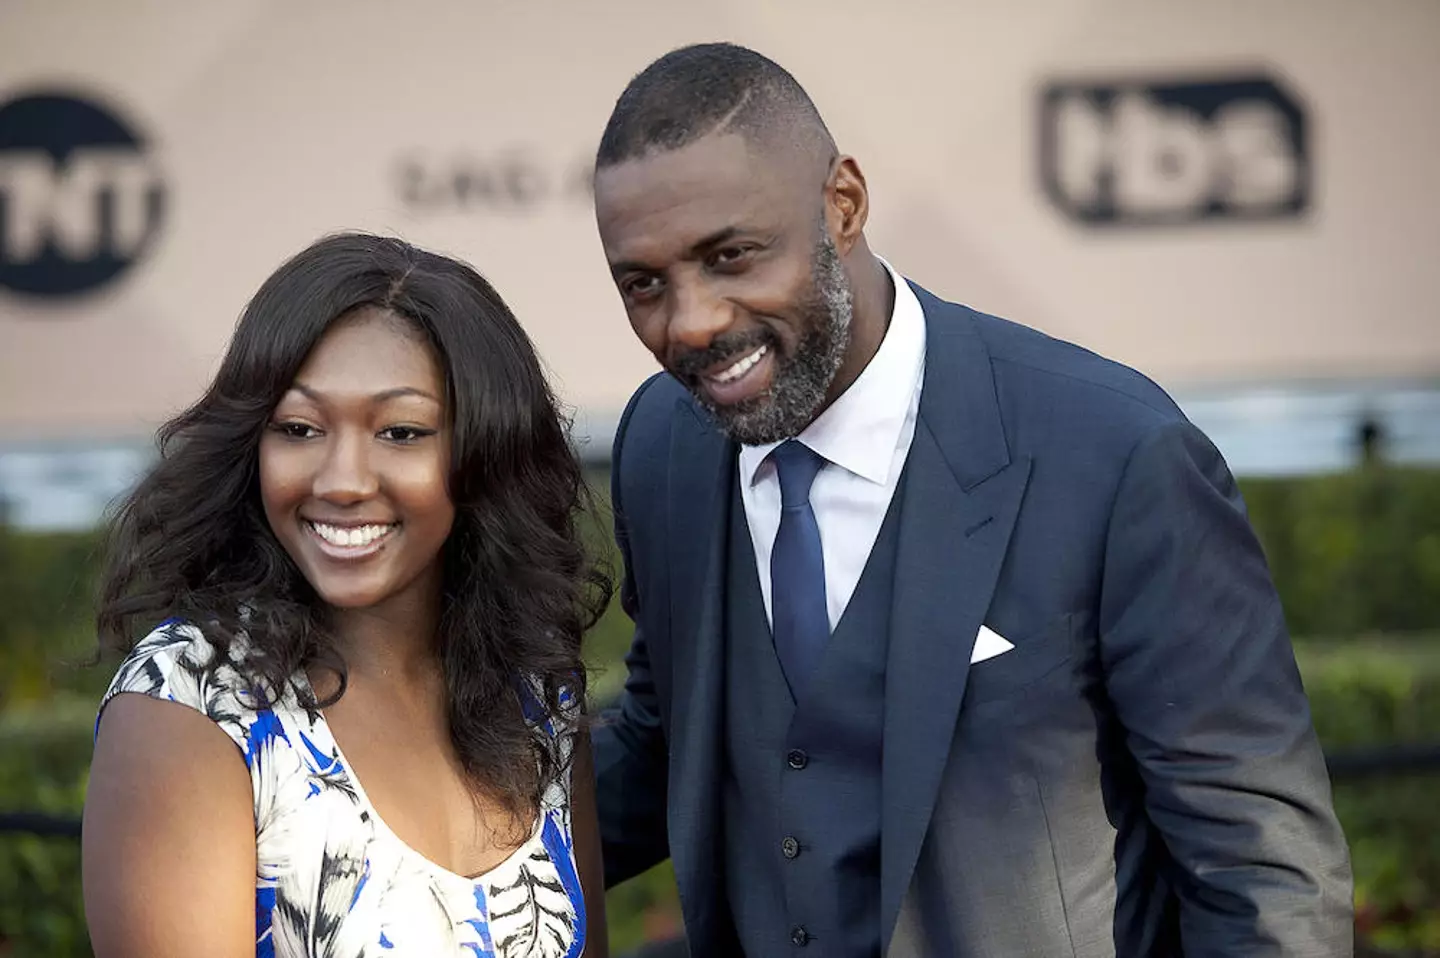 Idris says his daughter Isan is a fantastic actor and storyteller.